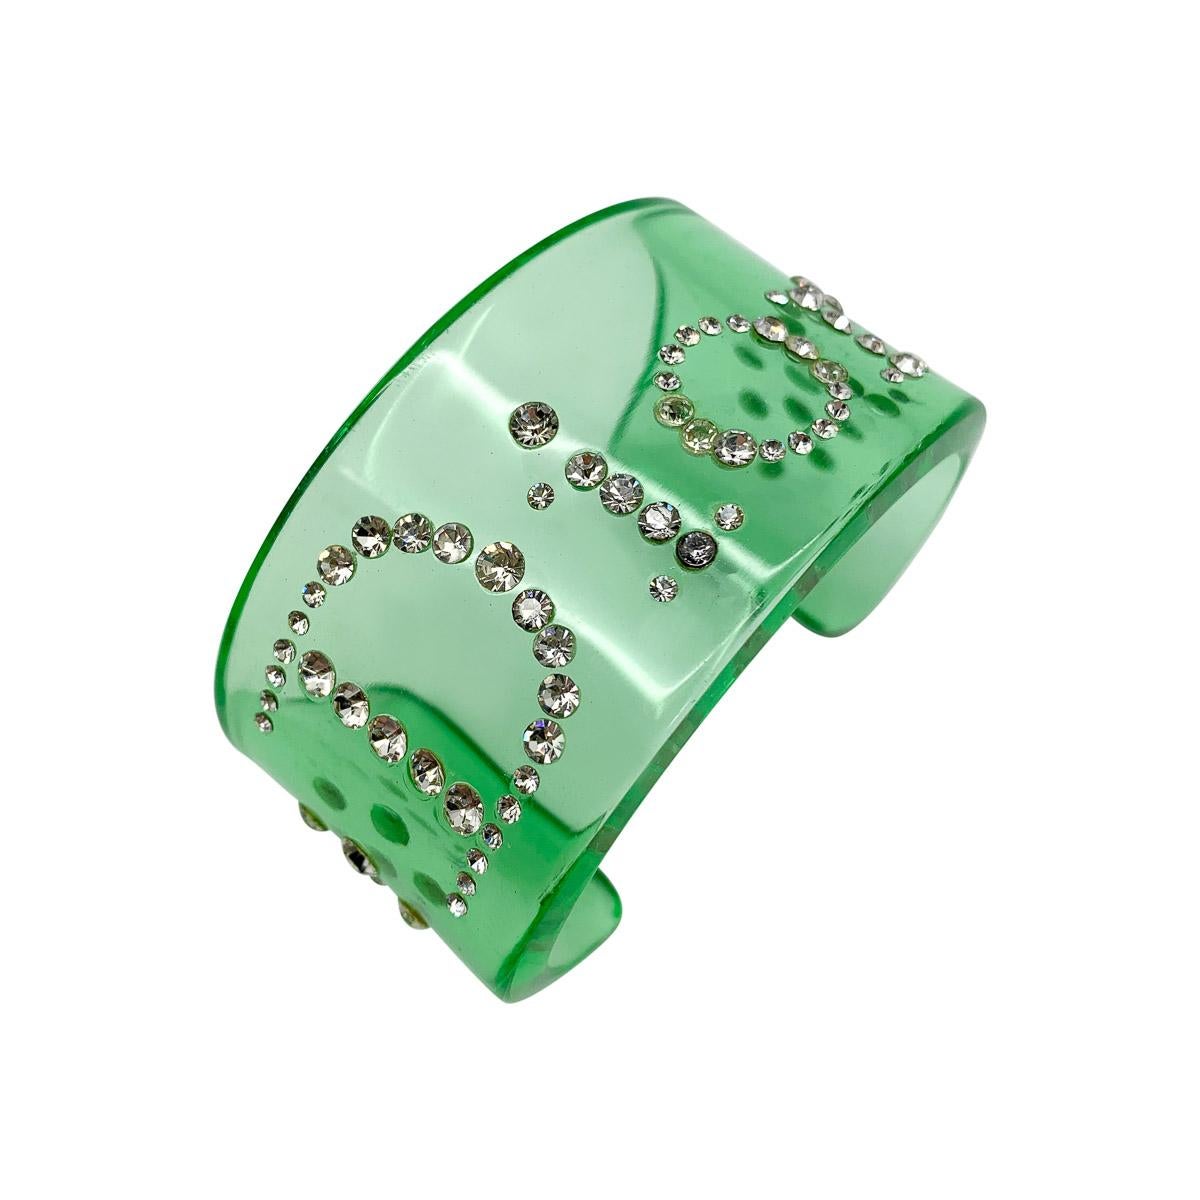 A Vintage Dior Apple Cuff from the Galliano era. Featuring a broad apple green lucite cuff studded with crystals spelling out the name of the iconic House of Dior.
With archive pieces from her own Dior collection displayed in London's highly